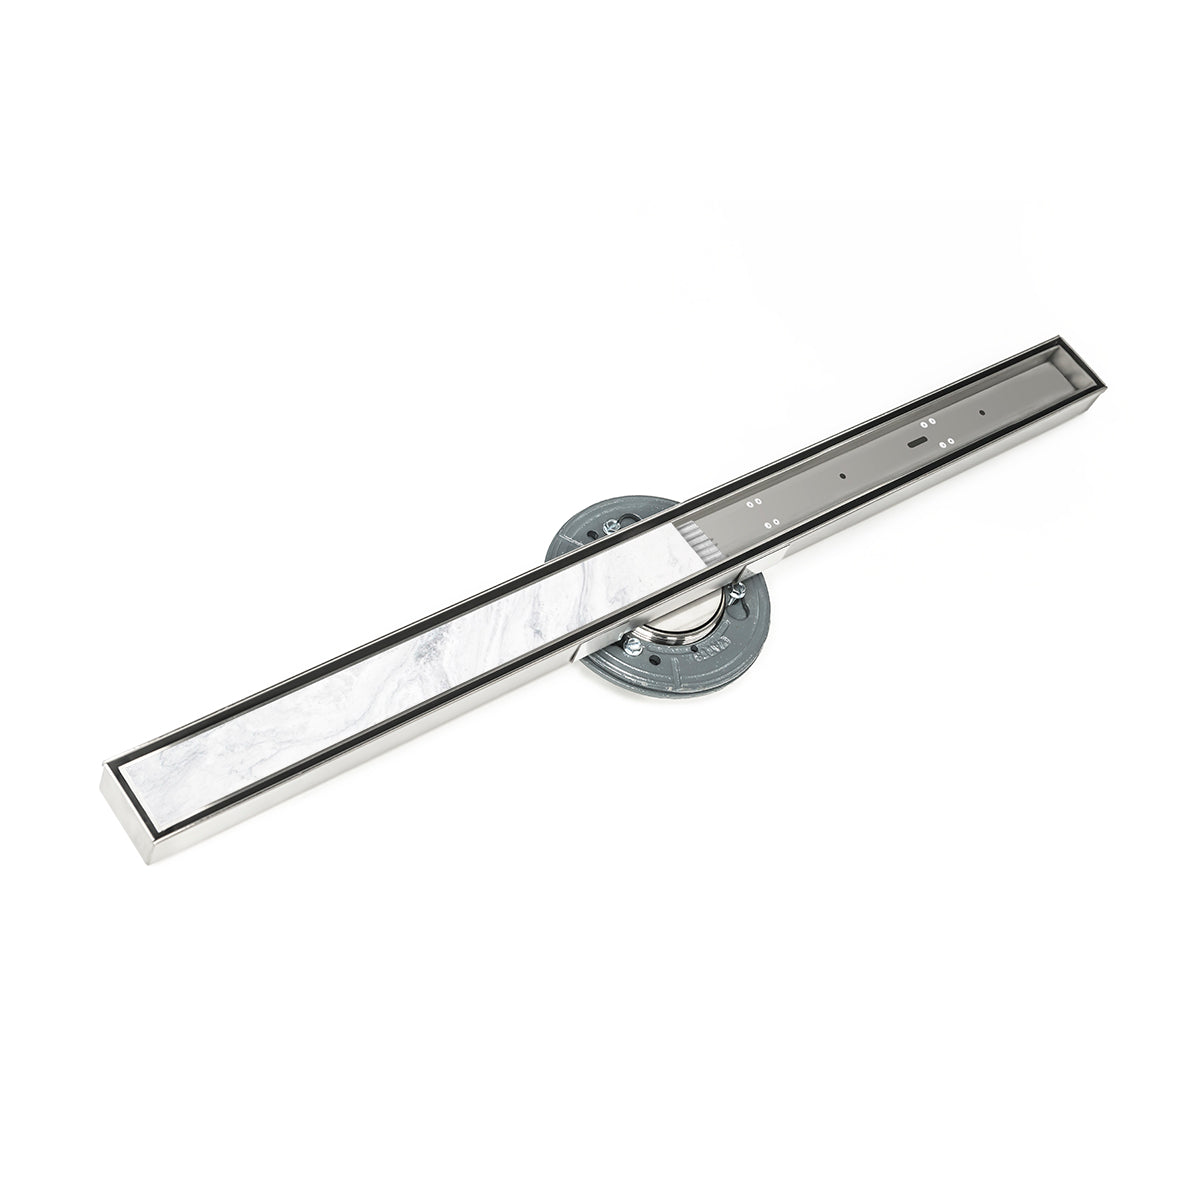 Infinity Drain 80" S-Stainless Steel Series High Flow Site Sizable Linear Drain Kit with Tile Insert Frame with Cast Iron Drain Body, 3" No Hub Outlet